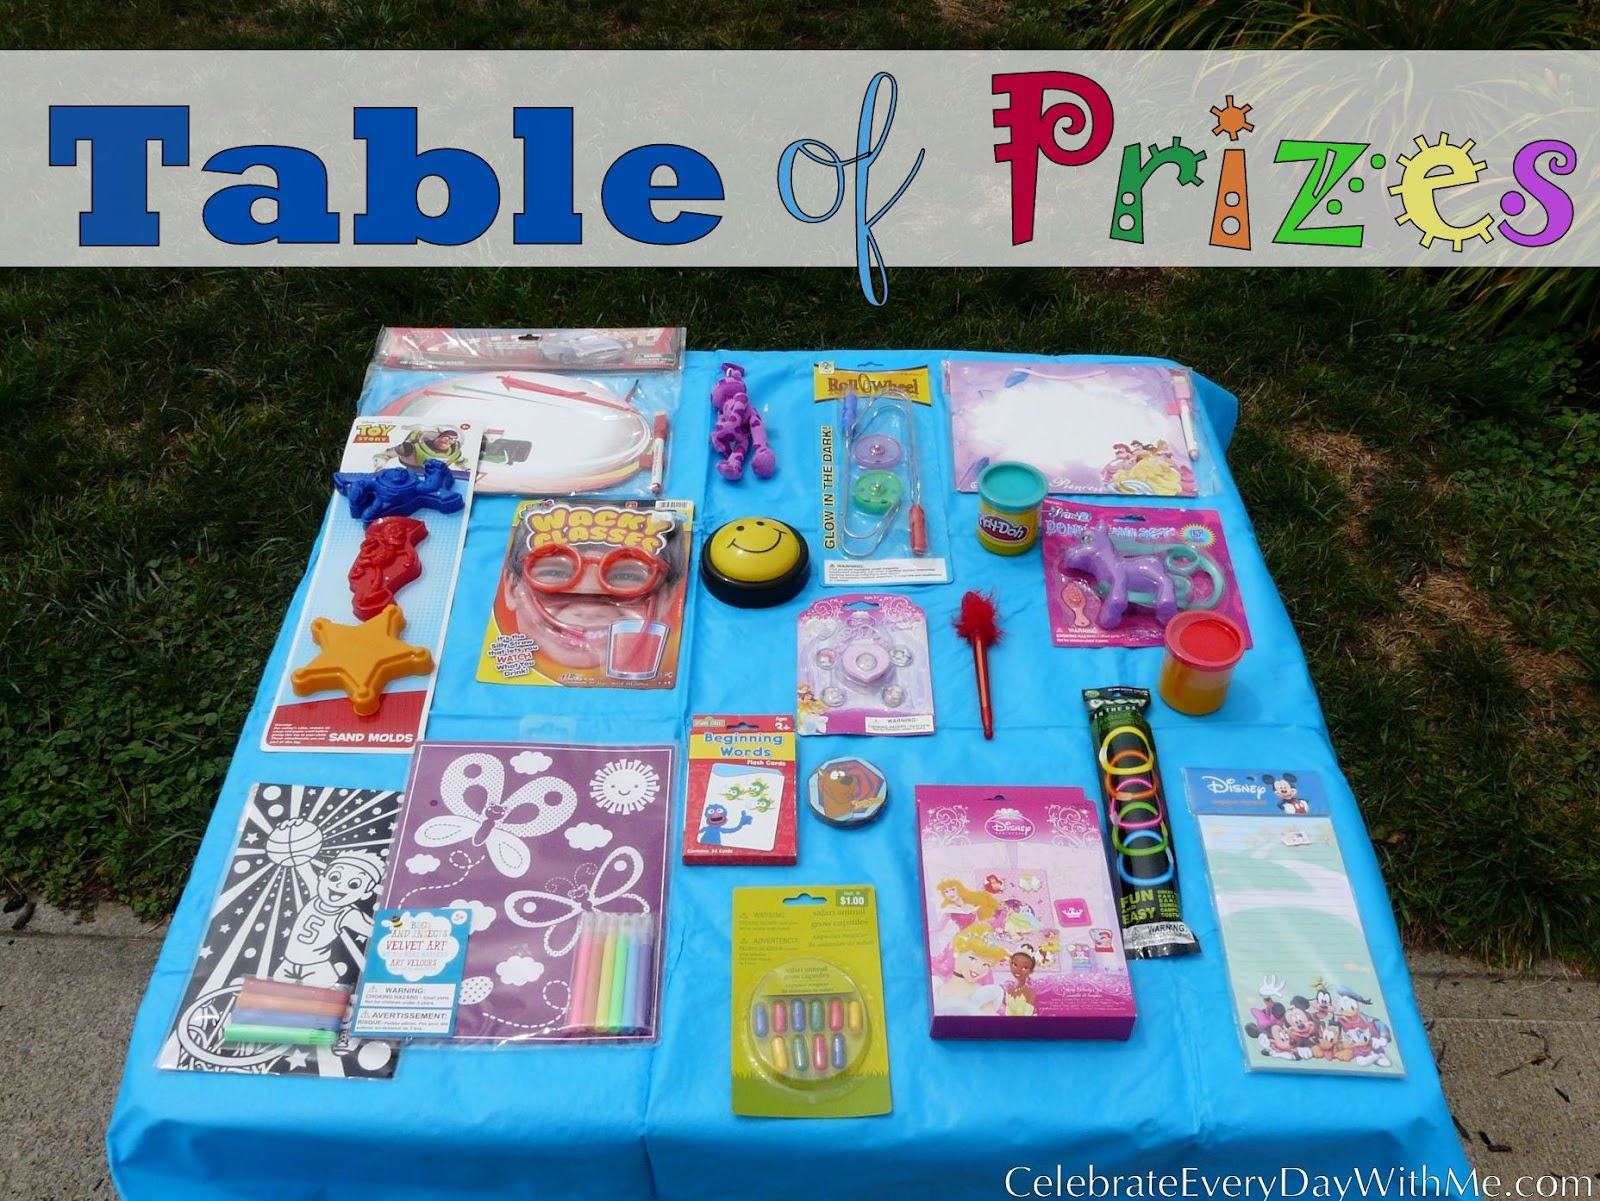 table-of-prizes-a-birthday-party-game-celebrate-every-day-with-me